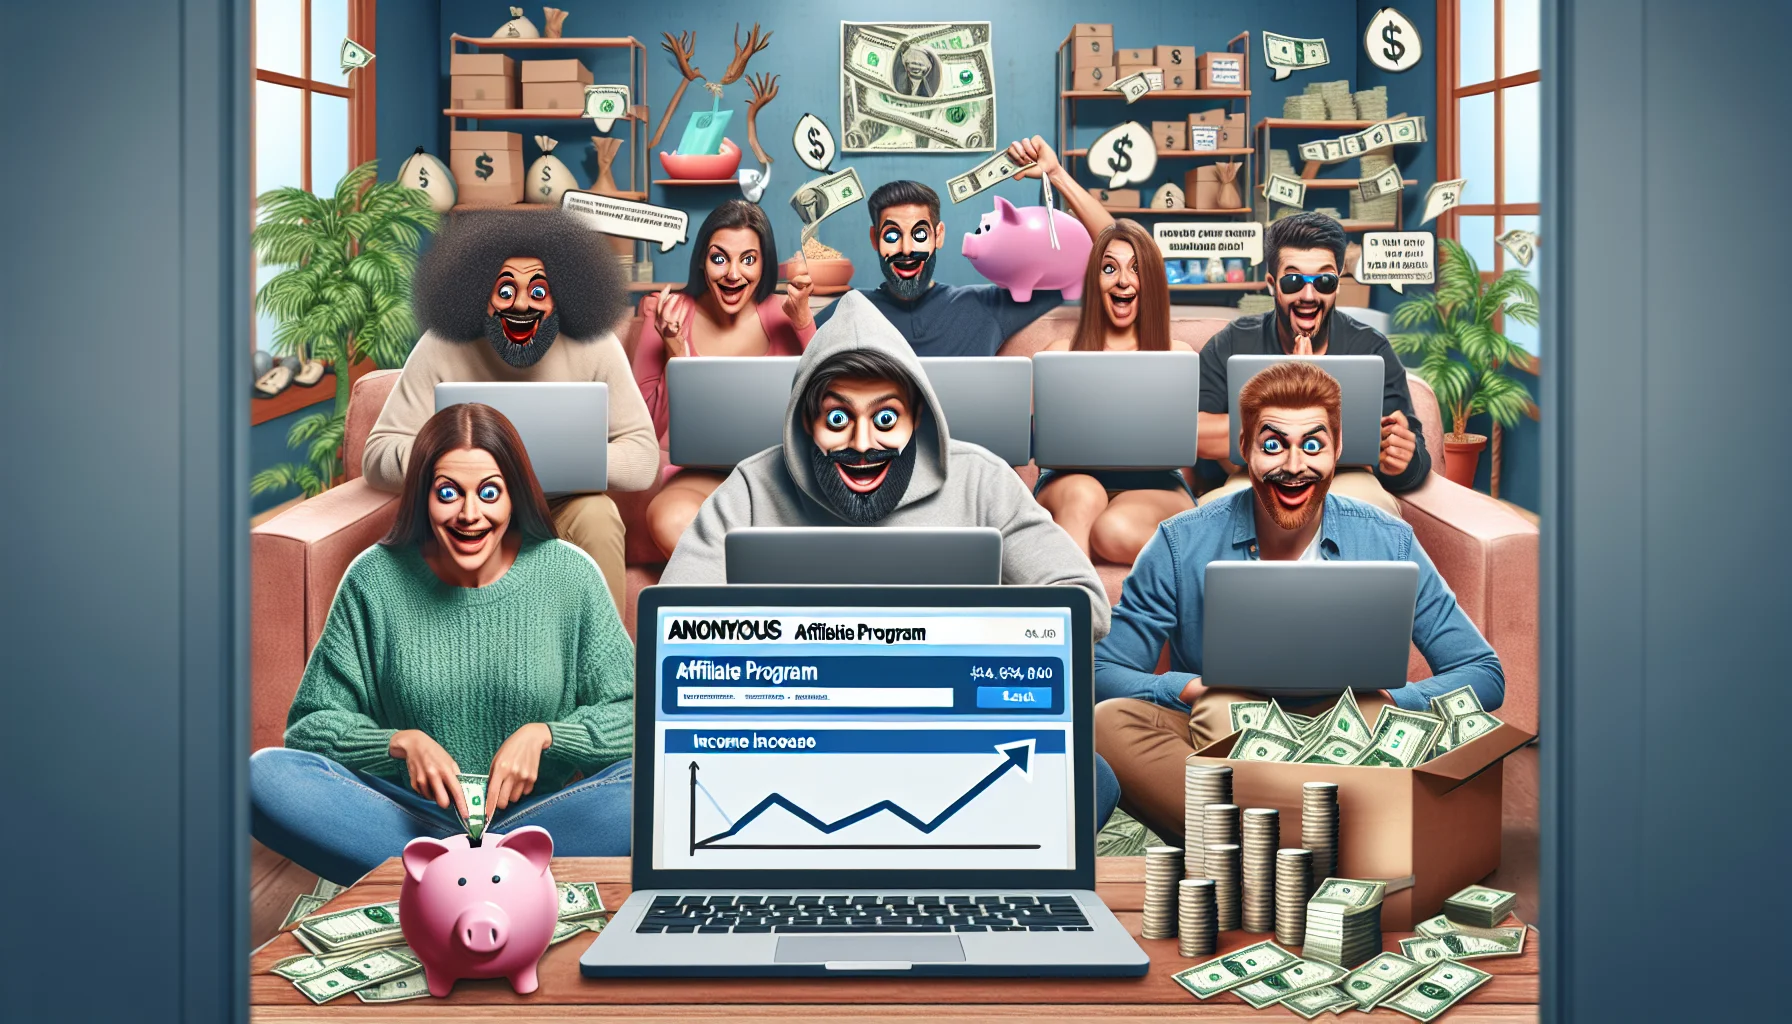 Create a humorous, realistic scene representing an anonymous retail store's affiliate program. Show different people of various descents and genders using their laptops in a comfortable home setting, with facial expressions of excitement and determination. They are focusing on the screen displaying an affiliate program page, with an income increase graph. Background items like piggy banks overflowing with coins, a stack of dollar bills, and a money tree contribute to the money-making theme underlines, adding a light-hearted touch to the scene while emphasizing the concept of making money online.